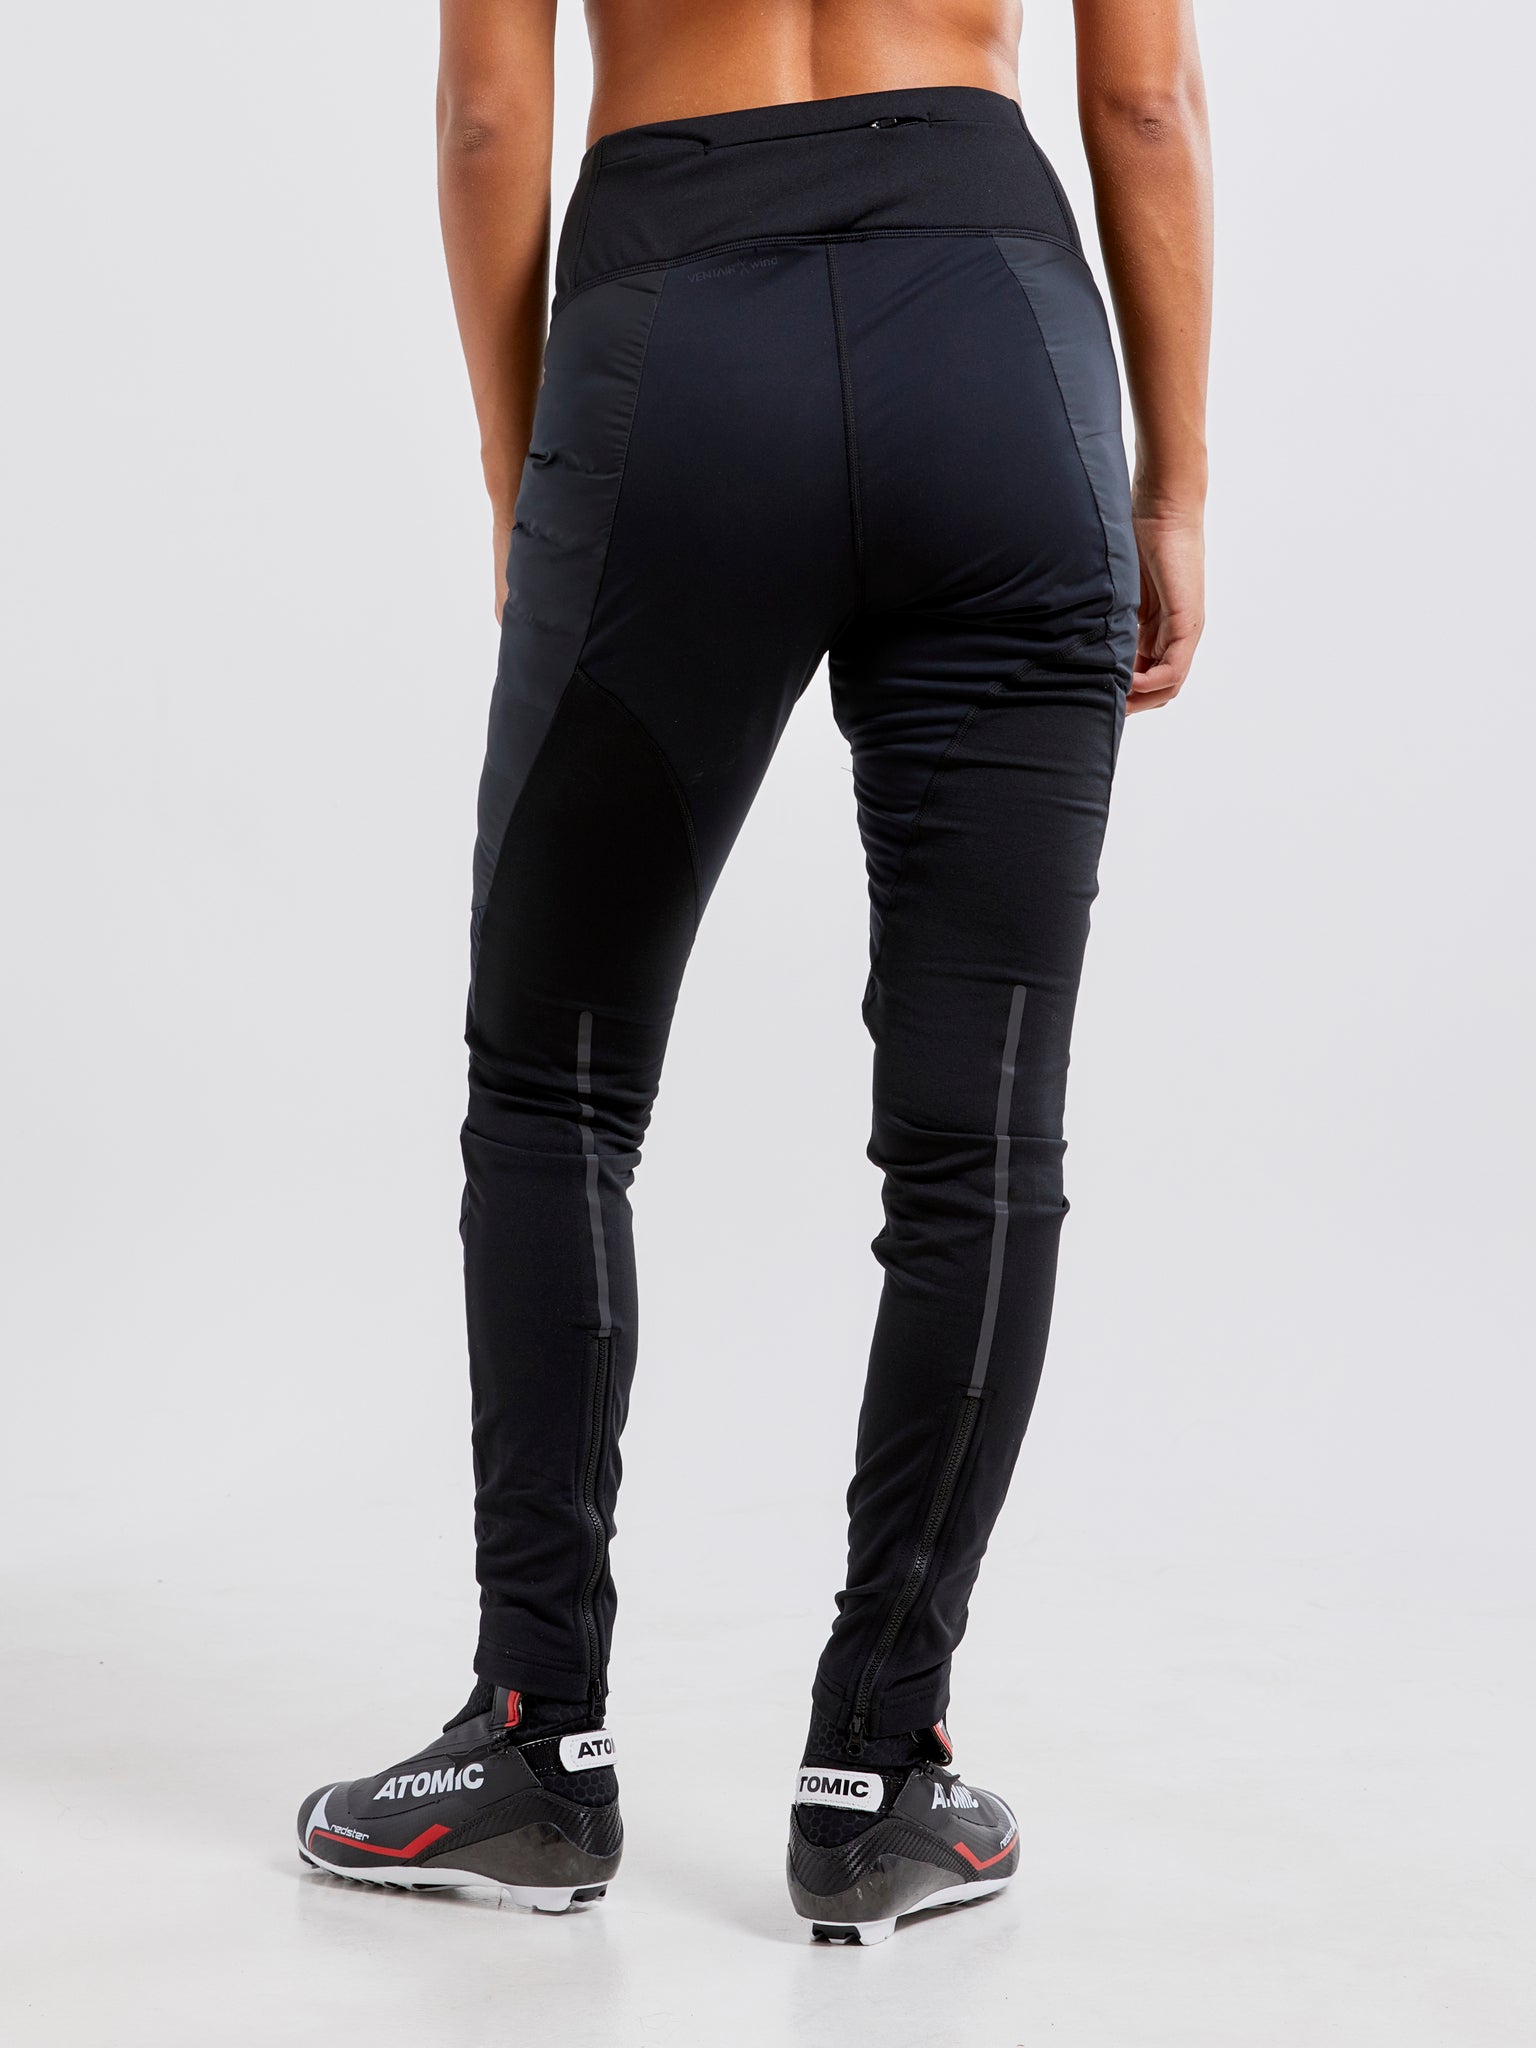 Craft Pursuit Thermal Cross Country Ski Tights - Women's